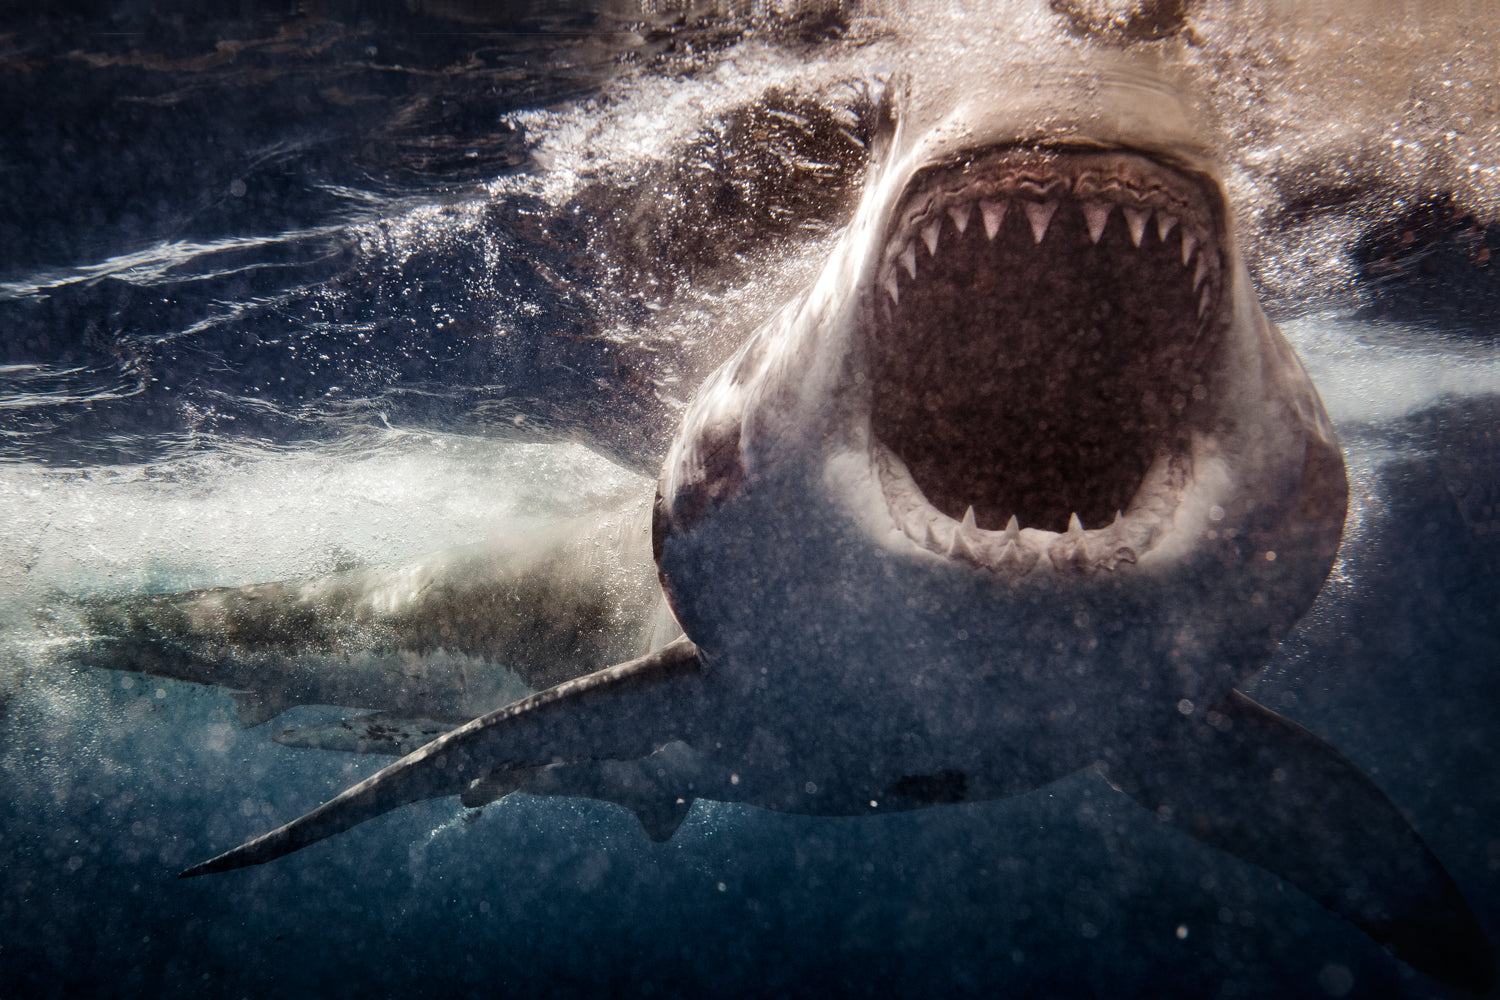 Great White Shark open mouth photographed by Thurston Photo